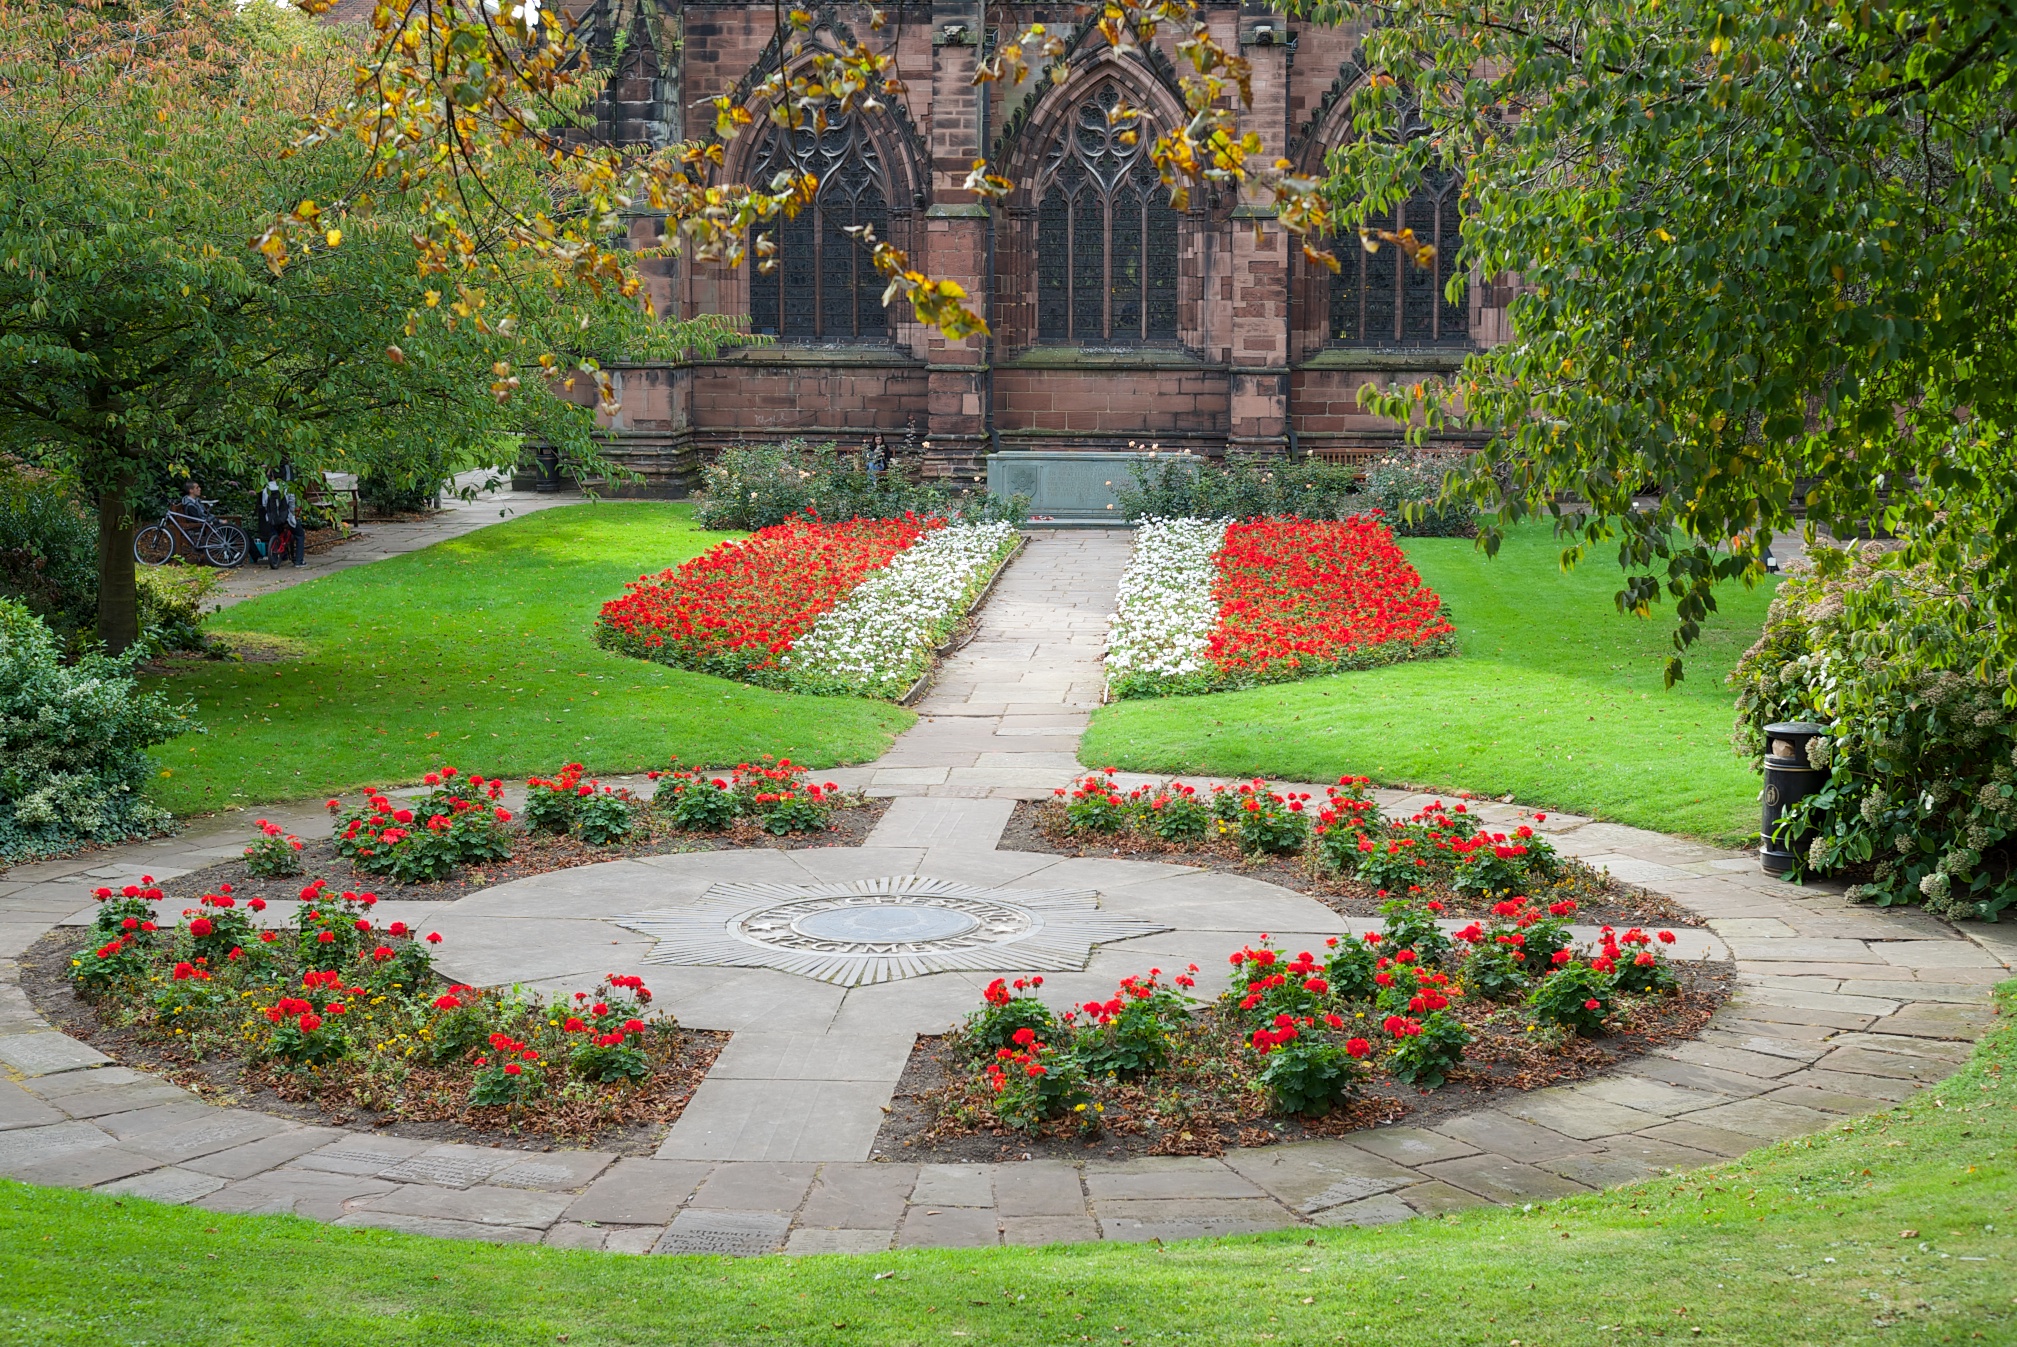 Cathedral Garden, Chester